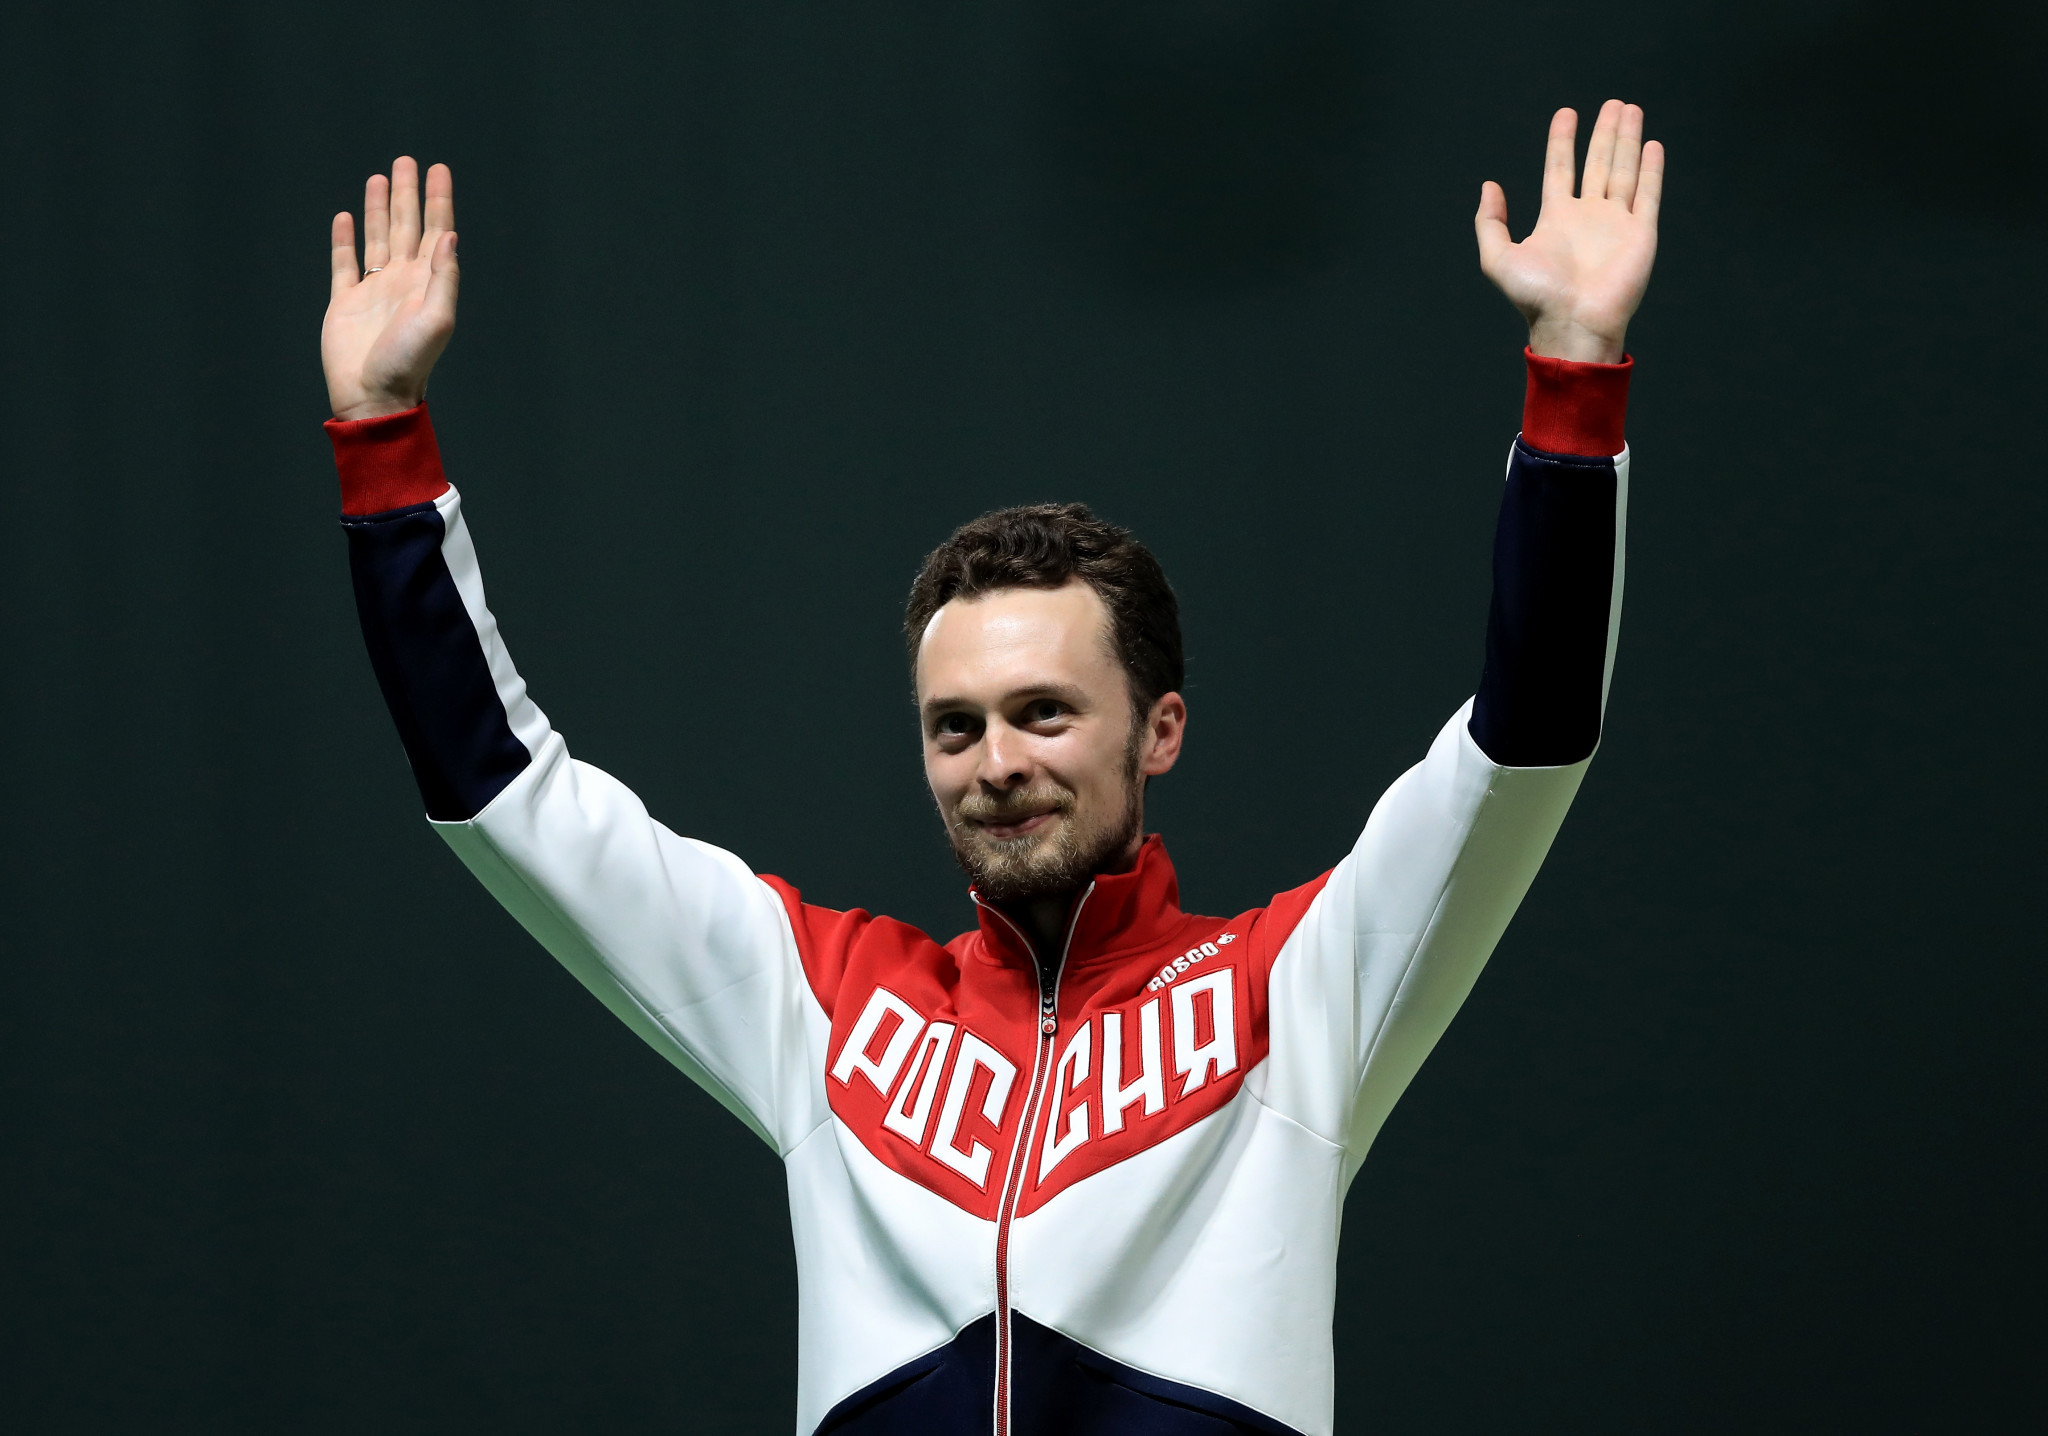 Sergey Kaminskiy helped Russia win the 50m rifle three positions mixed team event ©Getty Images